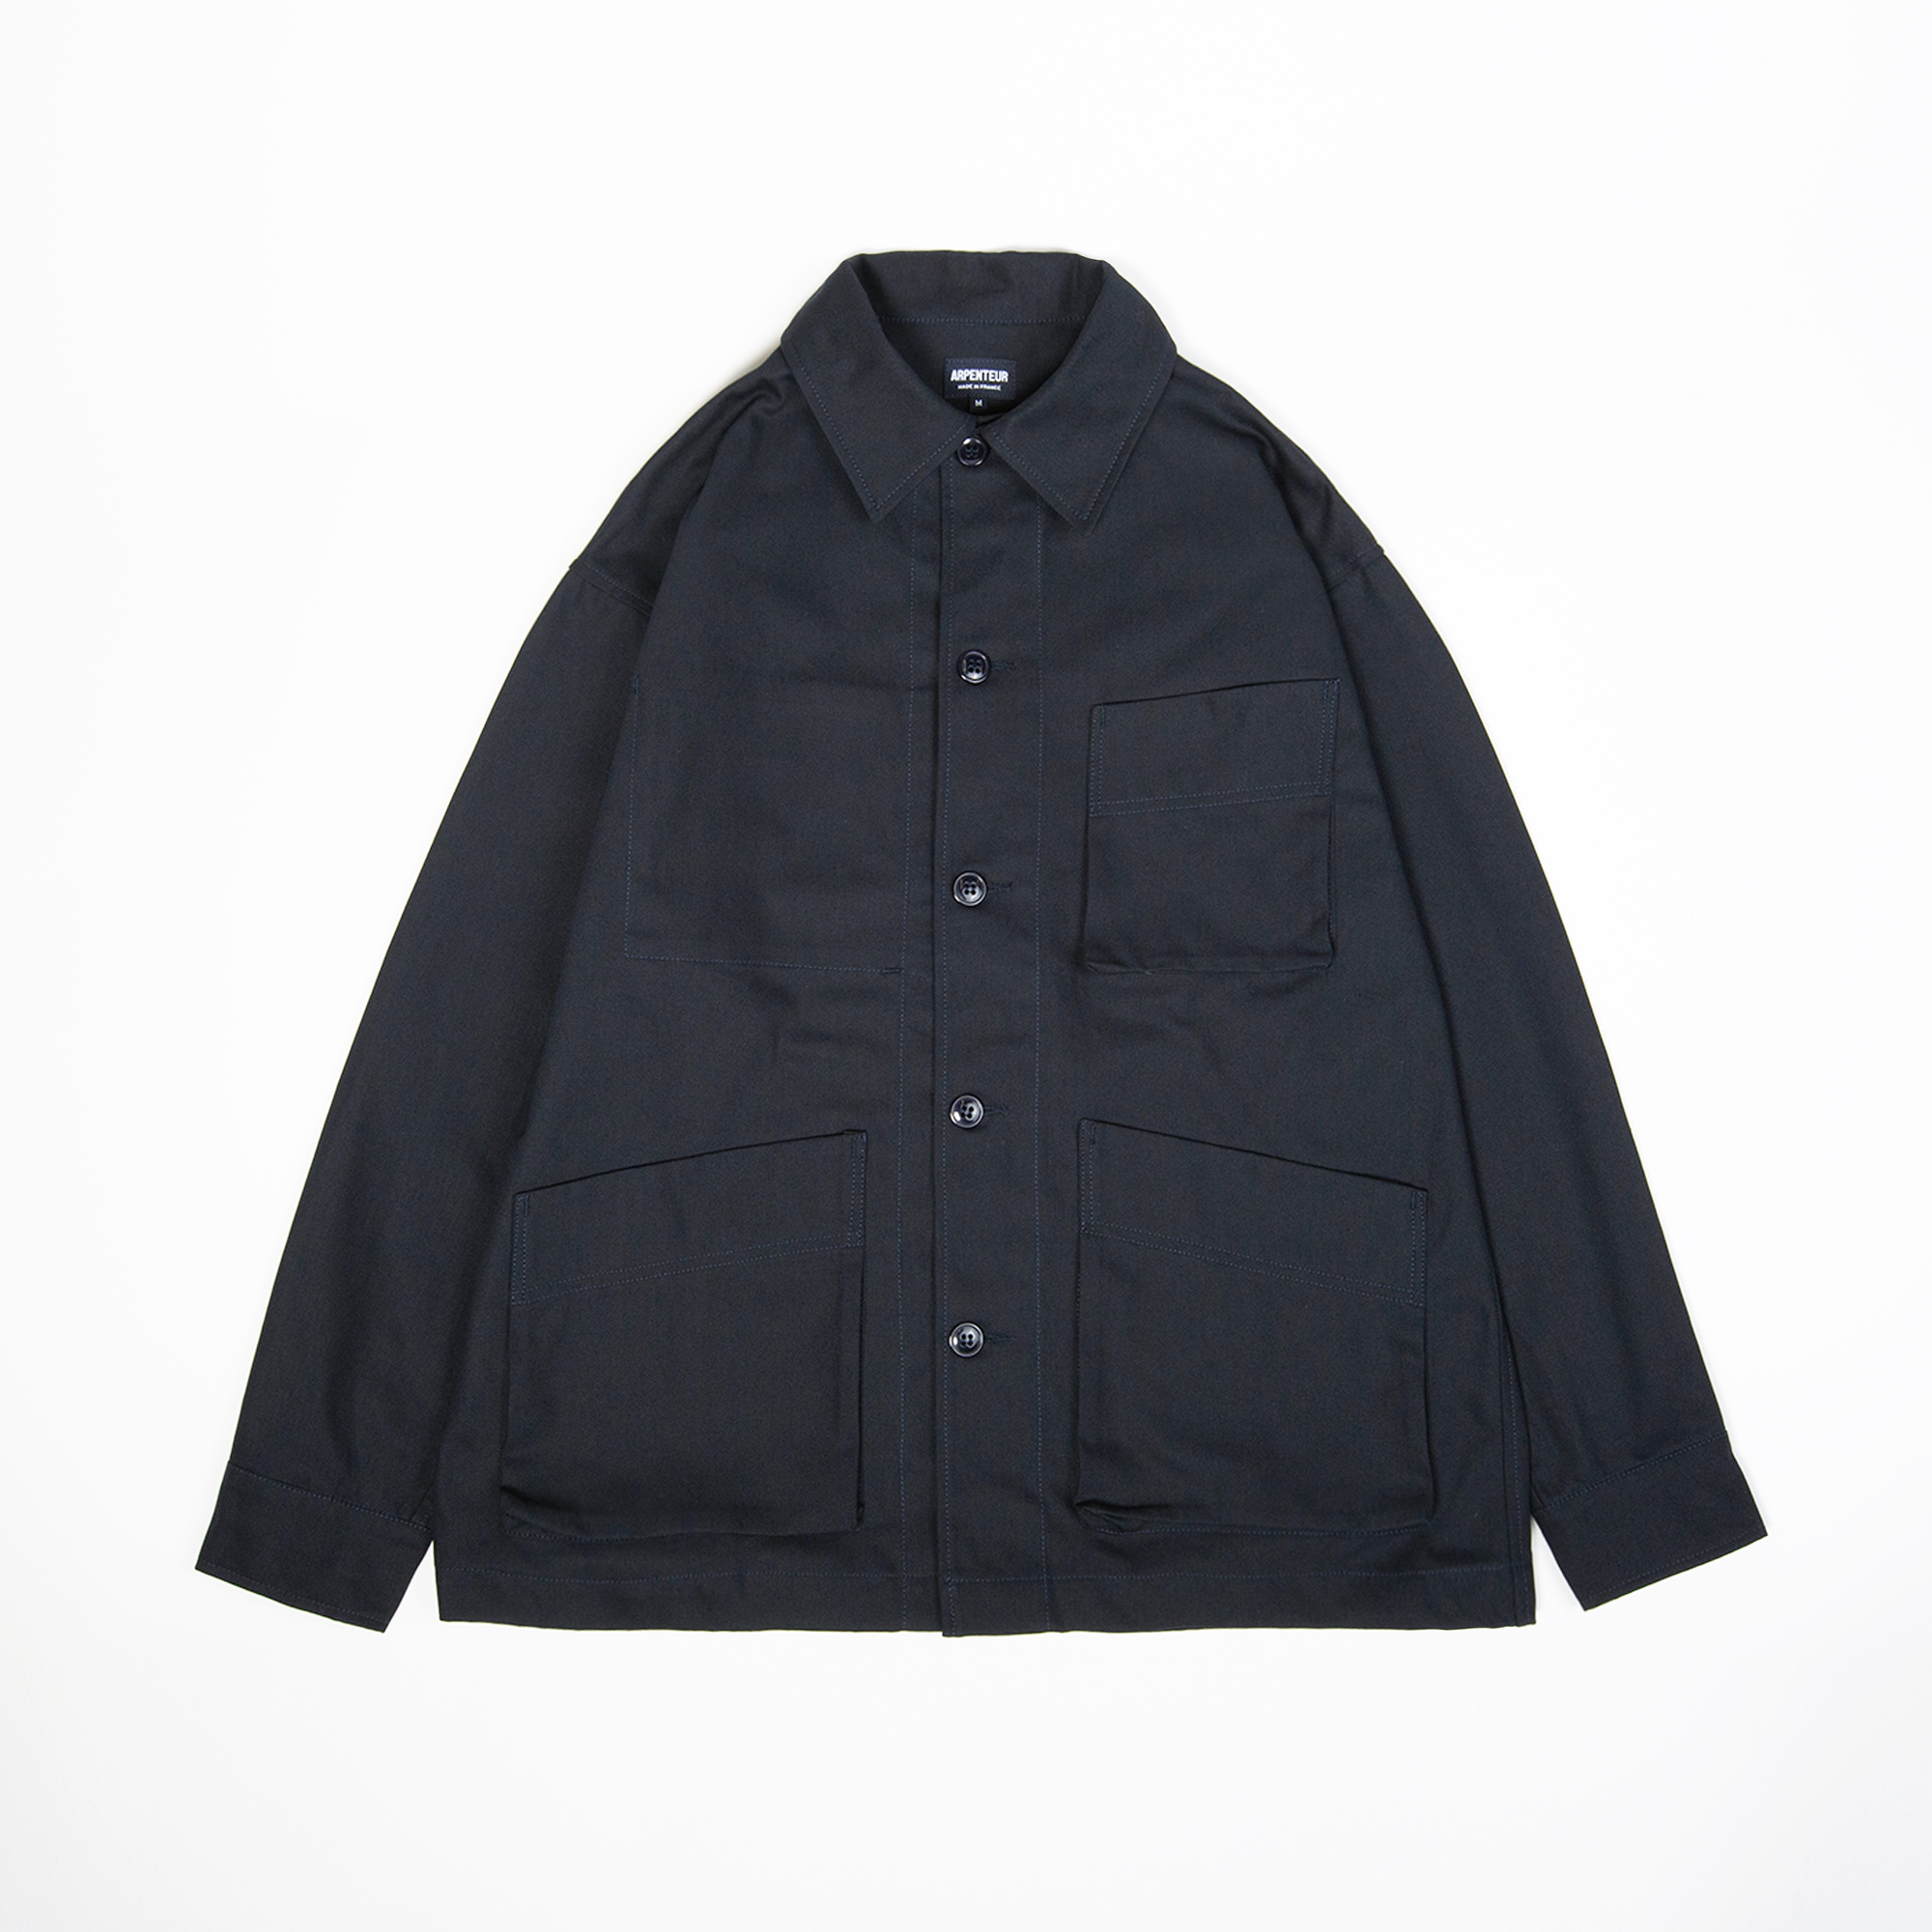 ADN jacket in Midnight blue color by Arpenteur